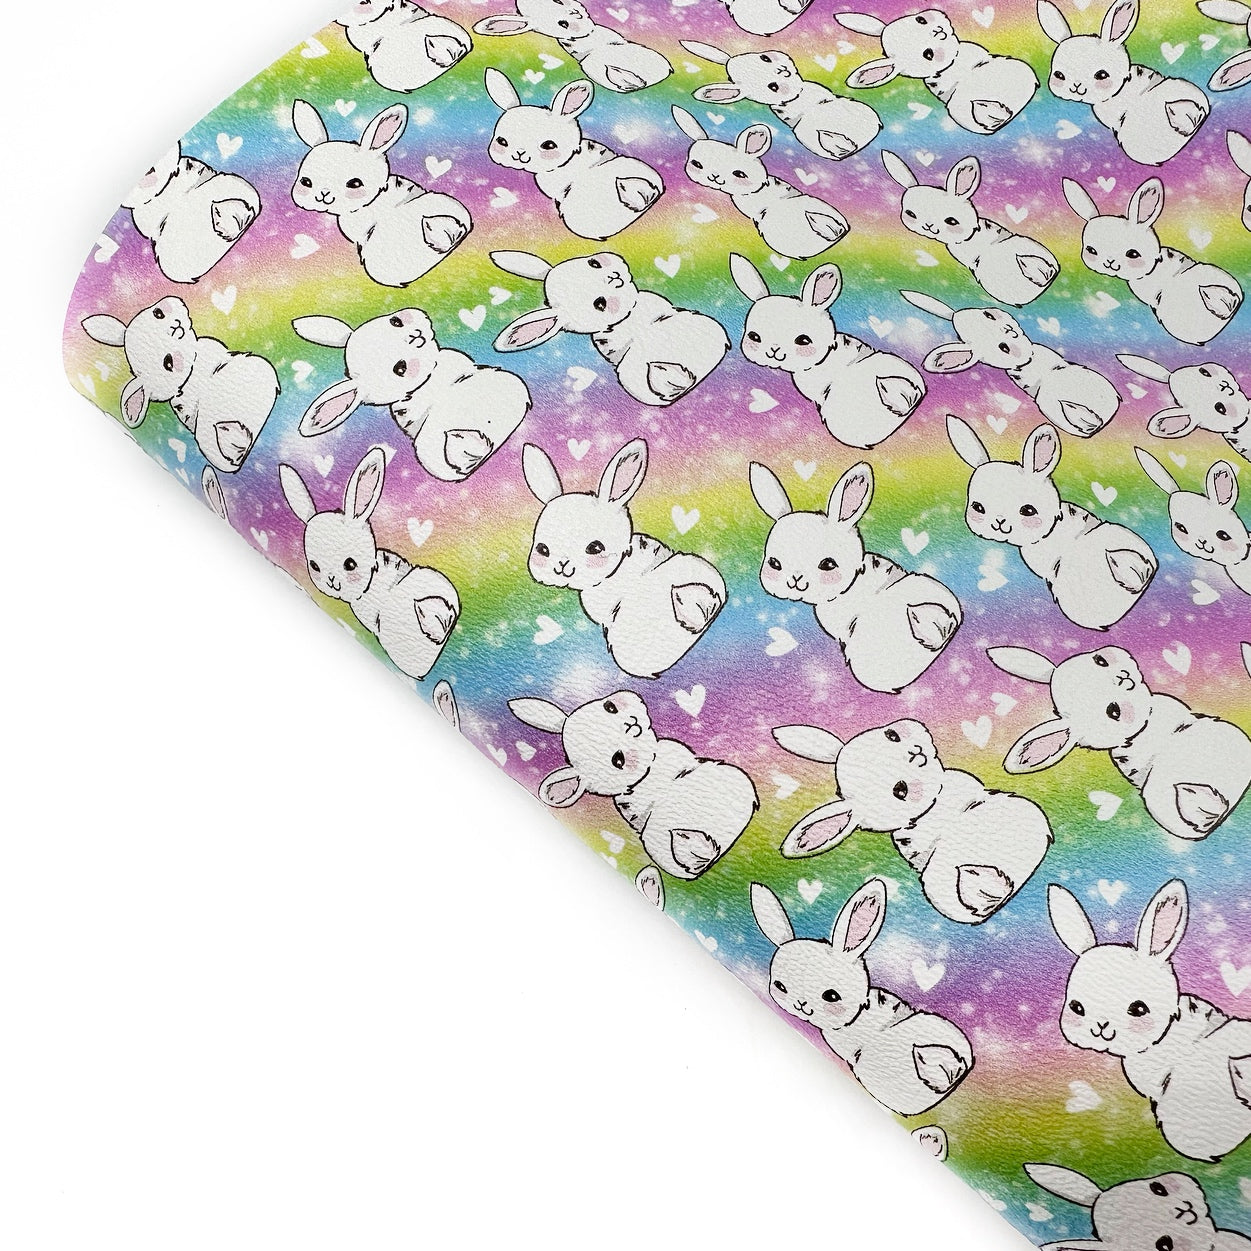 Pastel Rainbow Bunnies Premium Faux Leather Fabric Sheets